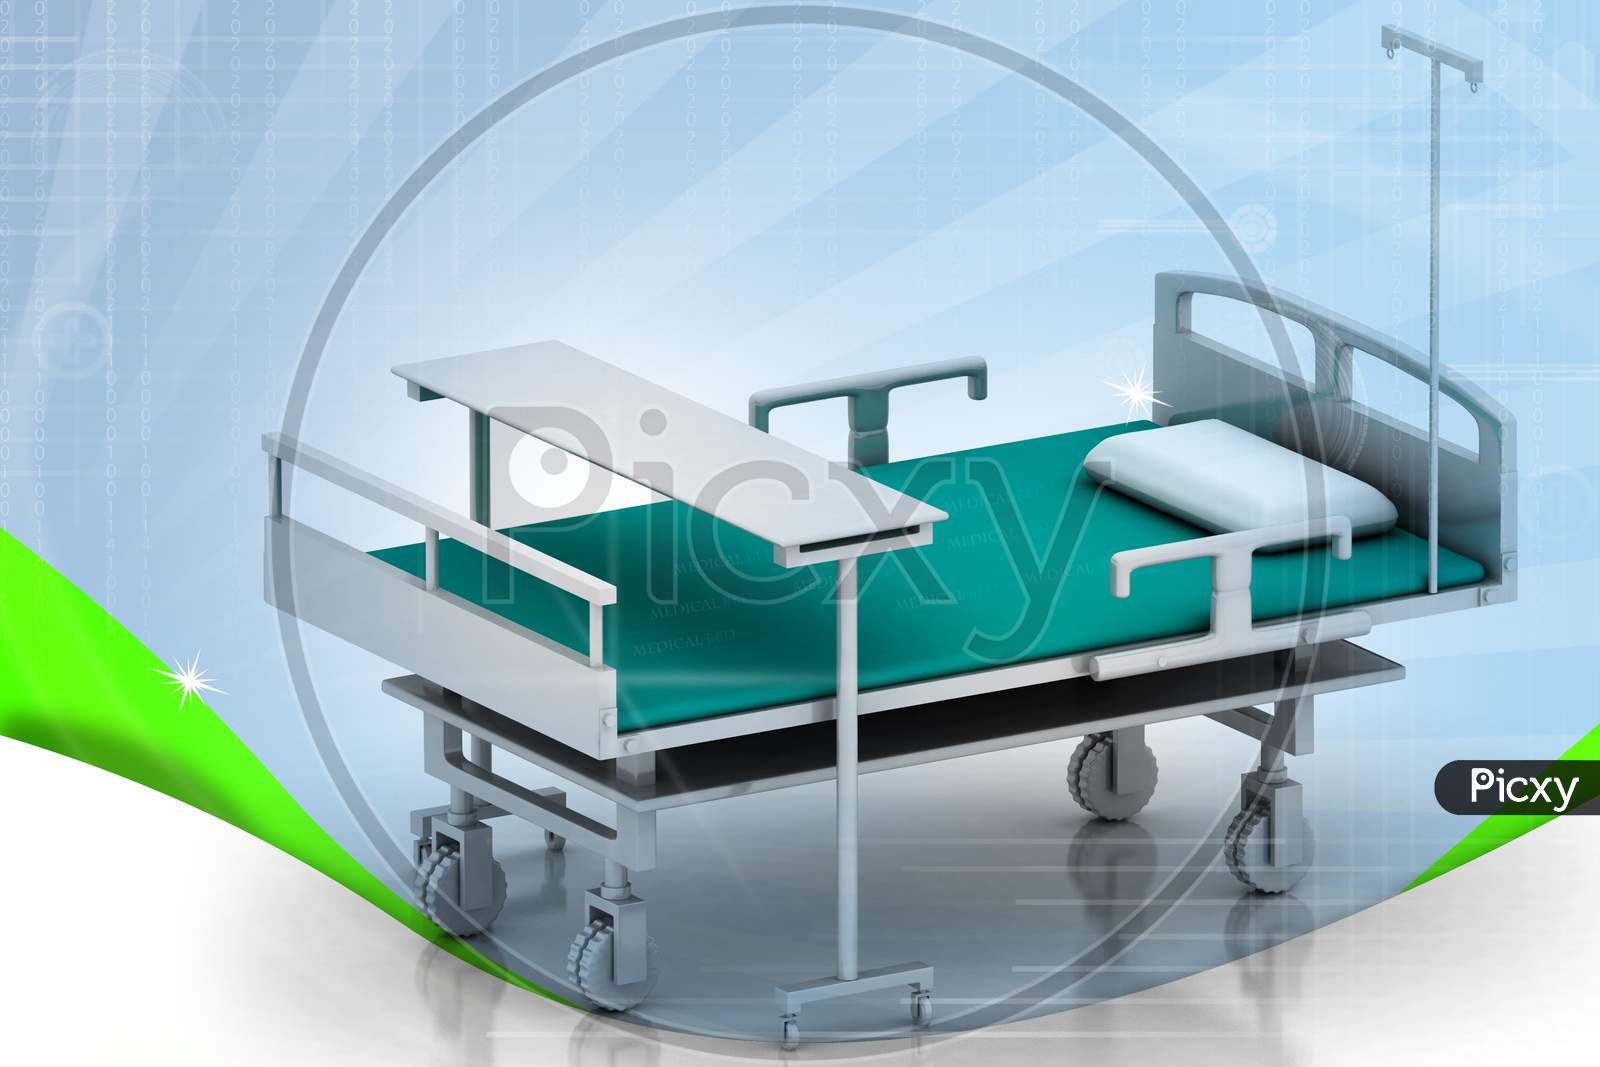 3D Multi Use Hospital Bed In Abstract White Background